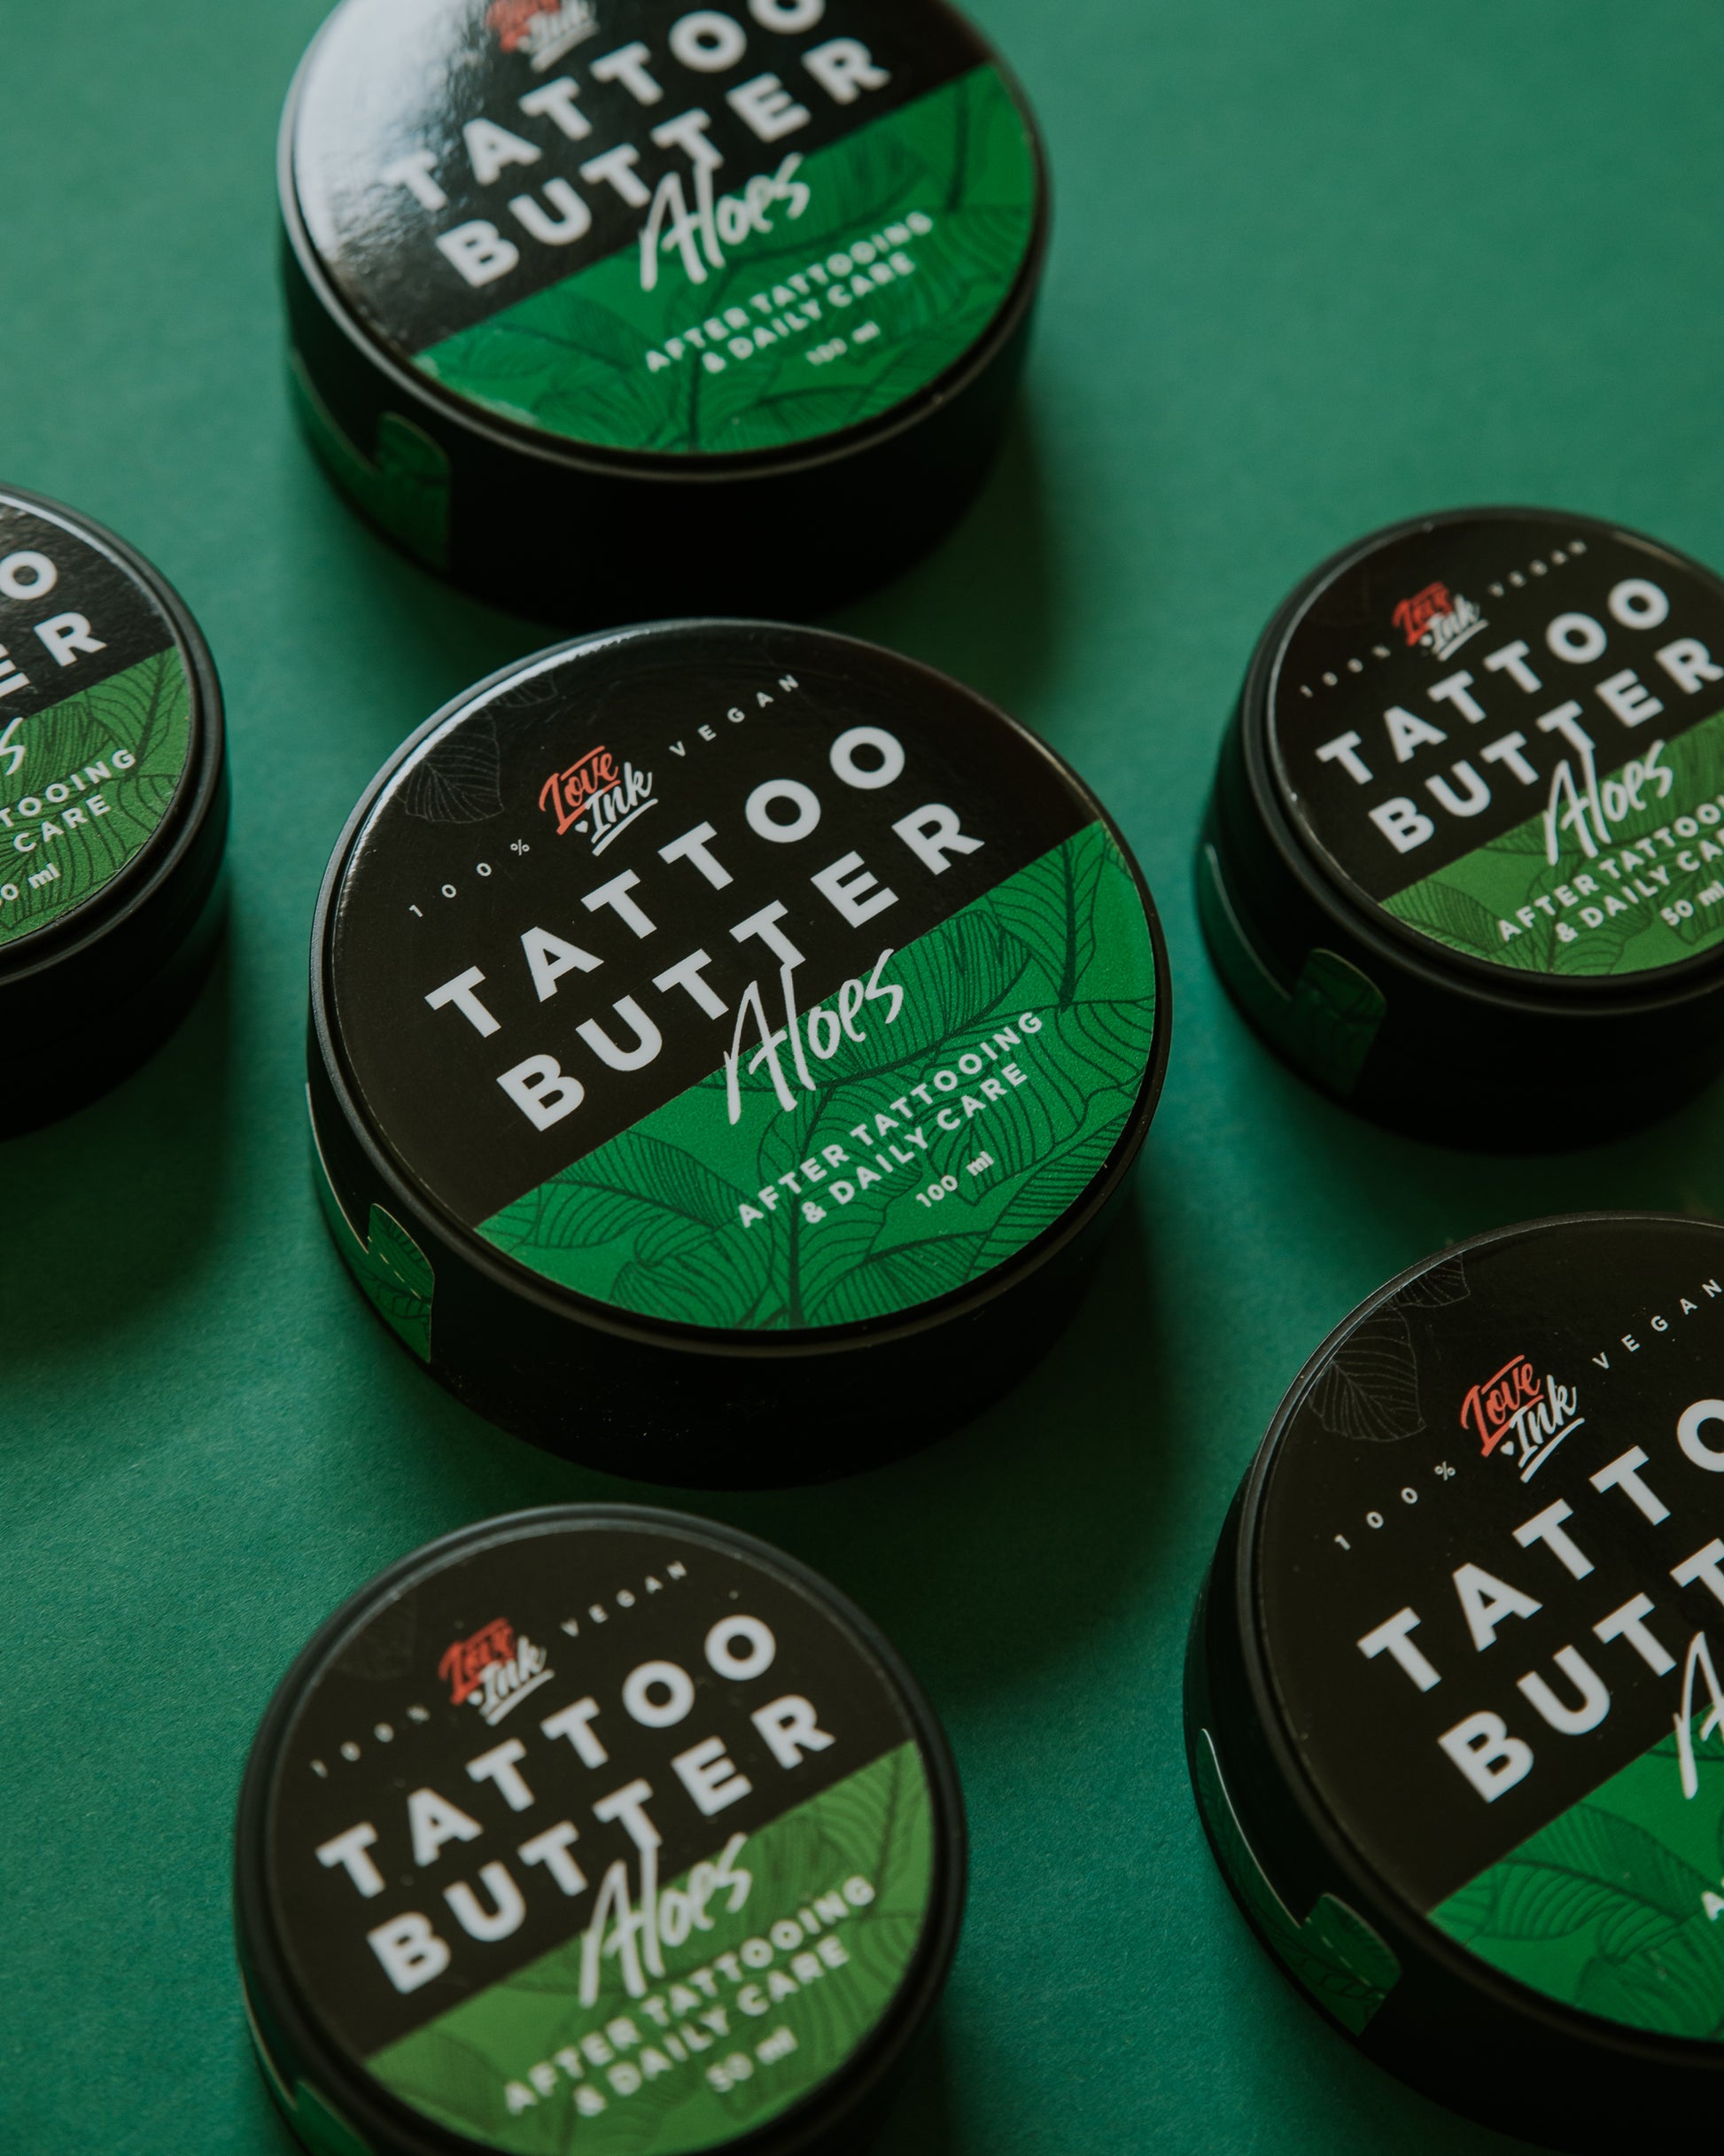 Multiple tins of Love Ink Tattoo Butter Aloe arranged on a green surface.